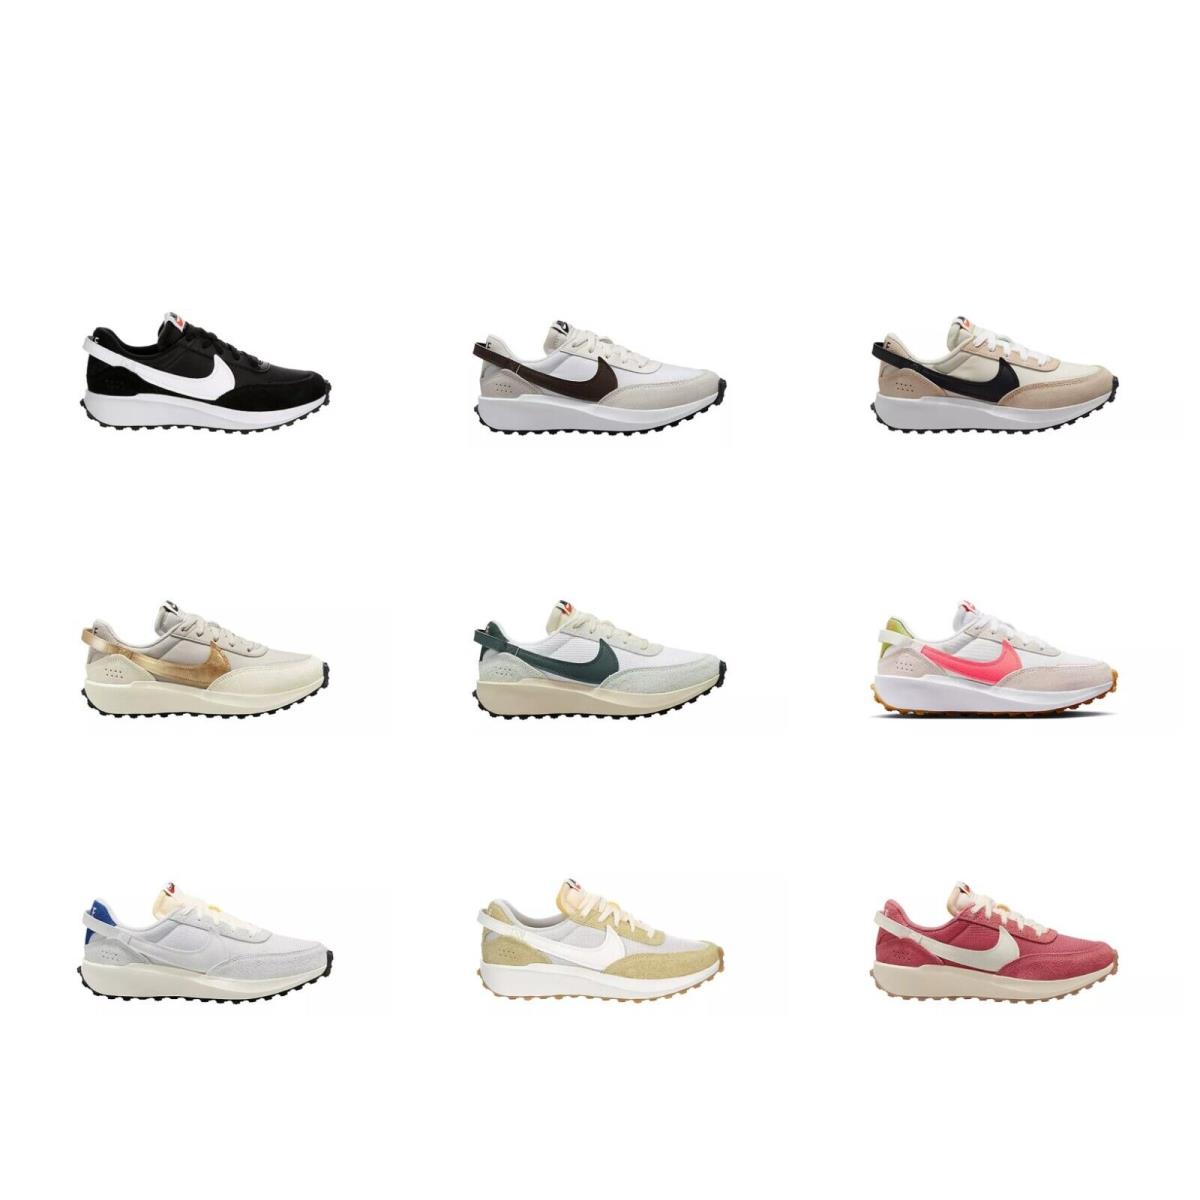 Nike Waffle Debut Retro Women`s Suede Athletic Running Gym Low Top Shoes Sneaker